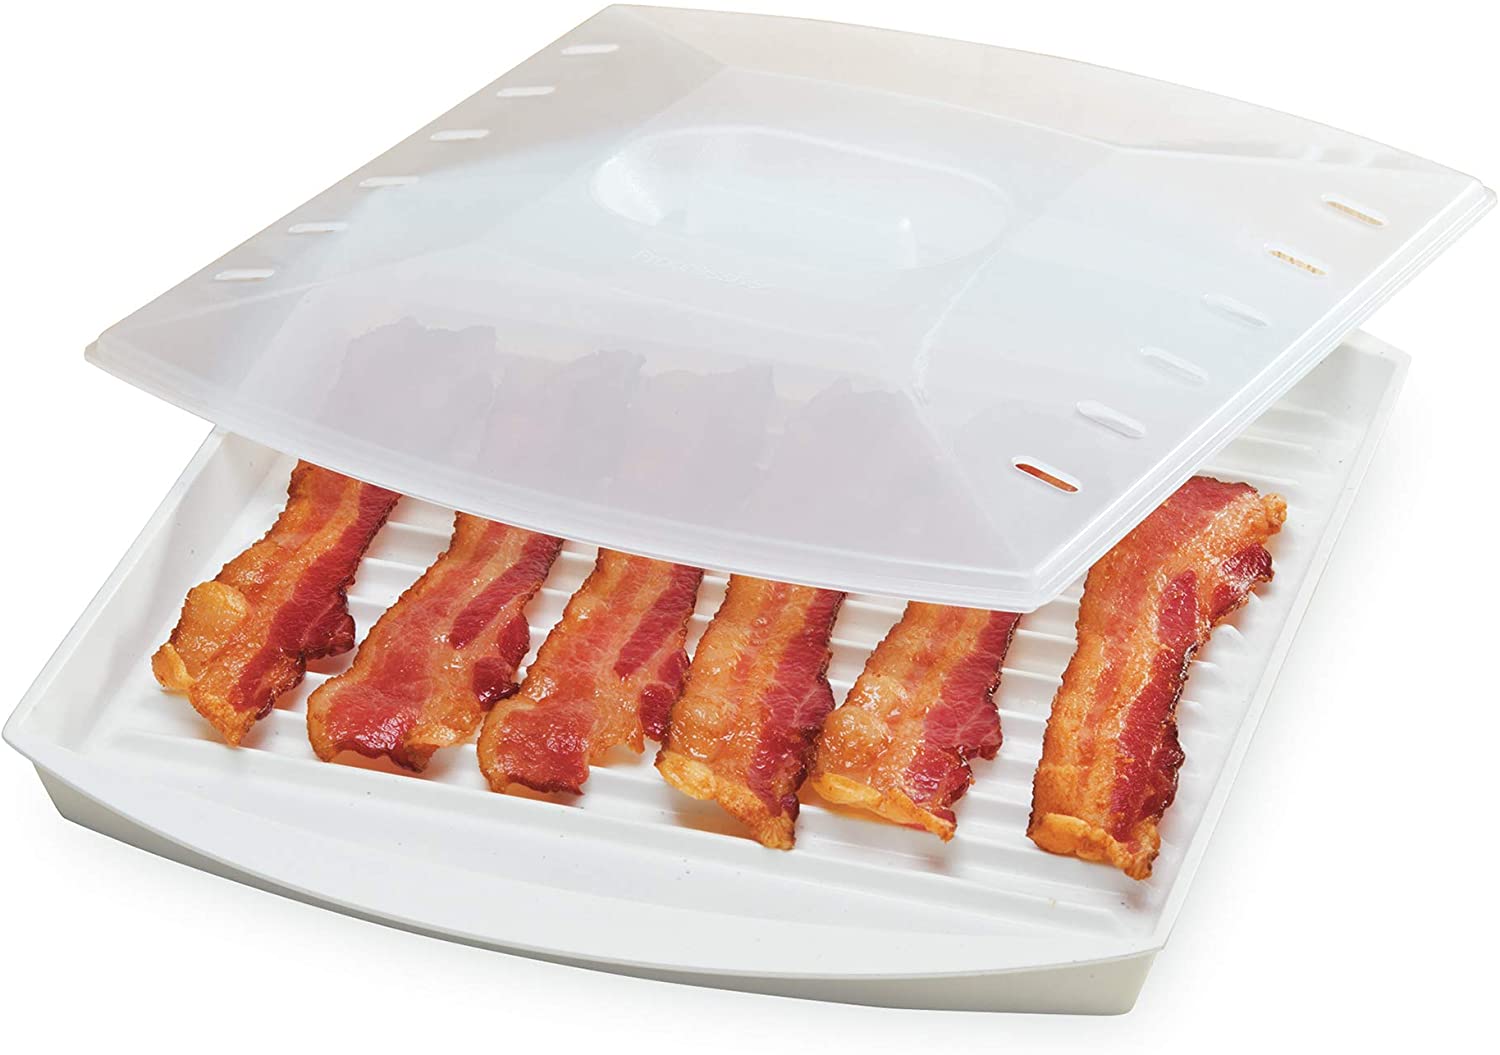 Microwave Bacon Barbecue Rack White Microwave Bacon Cooker,Creative Bacon Heating Rack Reduces Fat Up To 35% for a Healthy Breakfast 